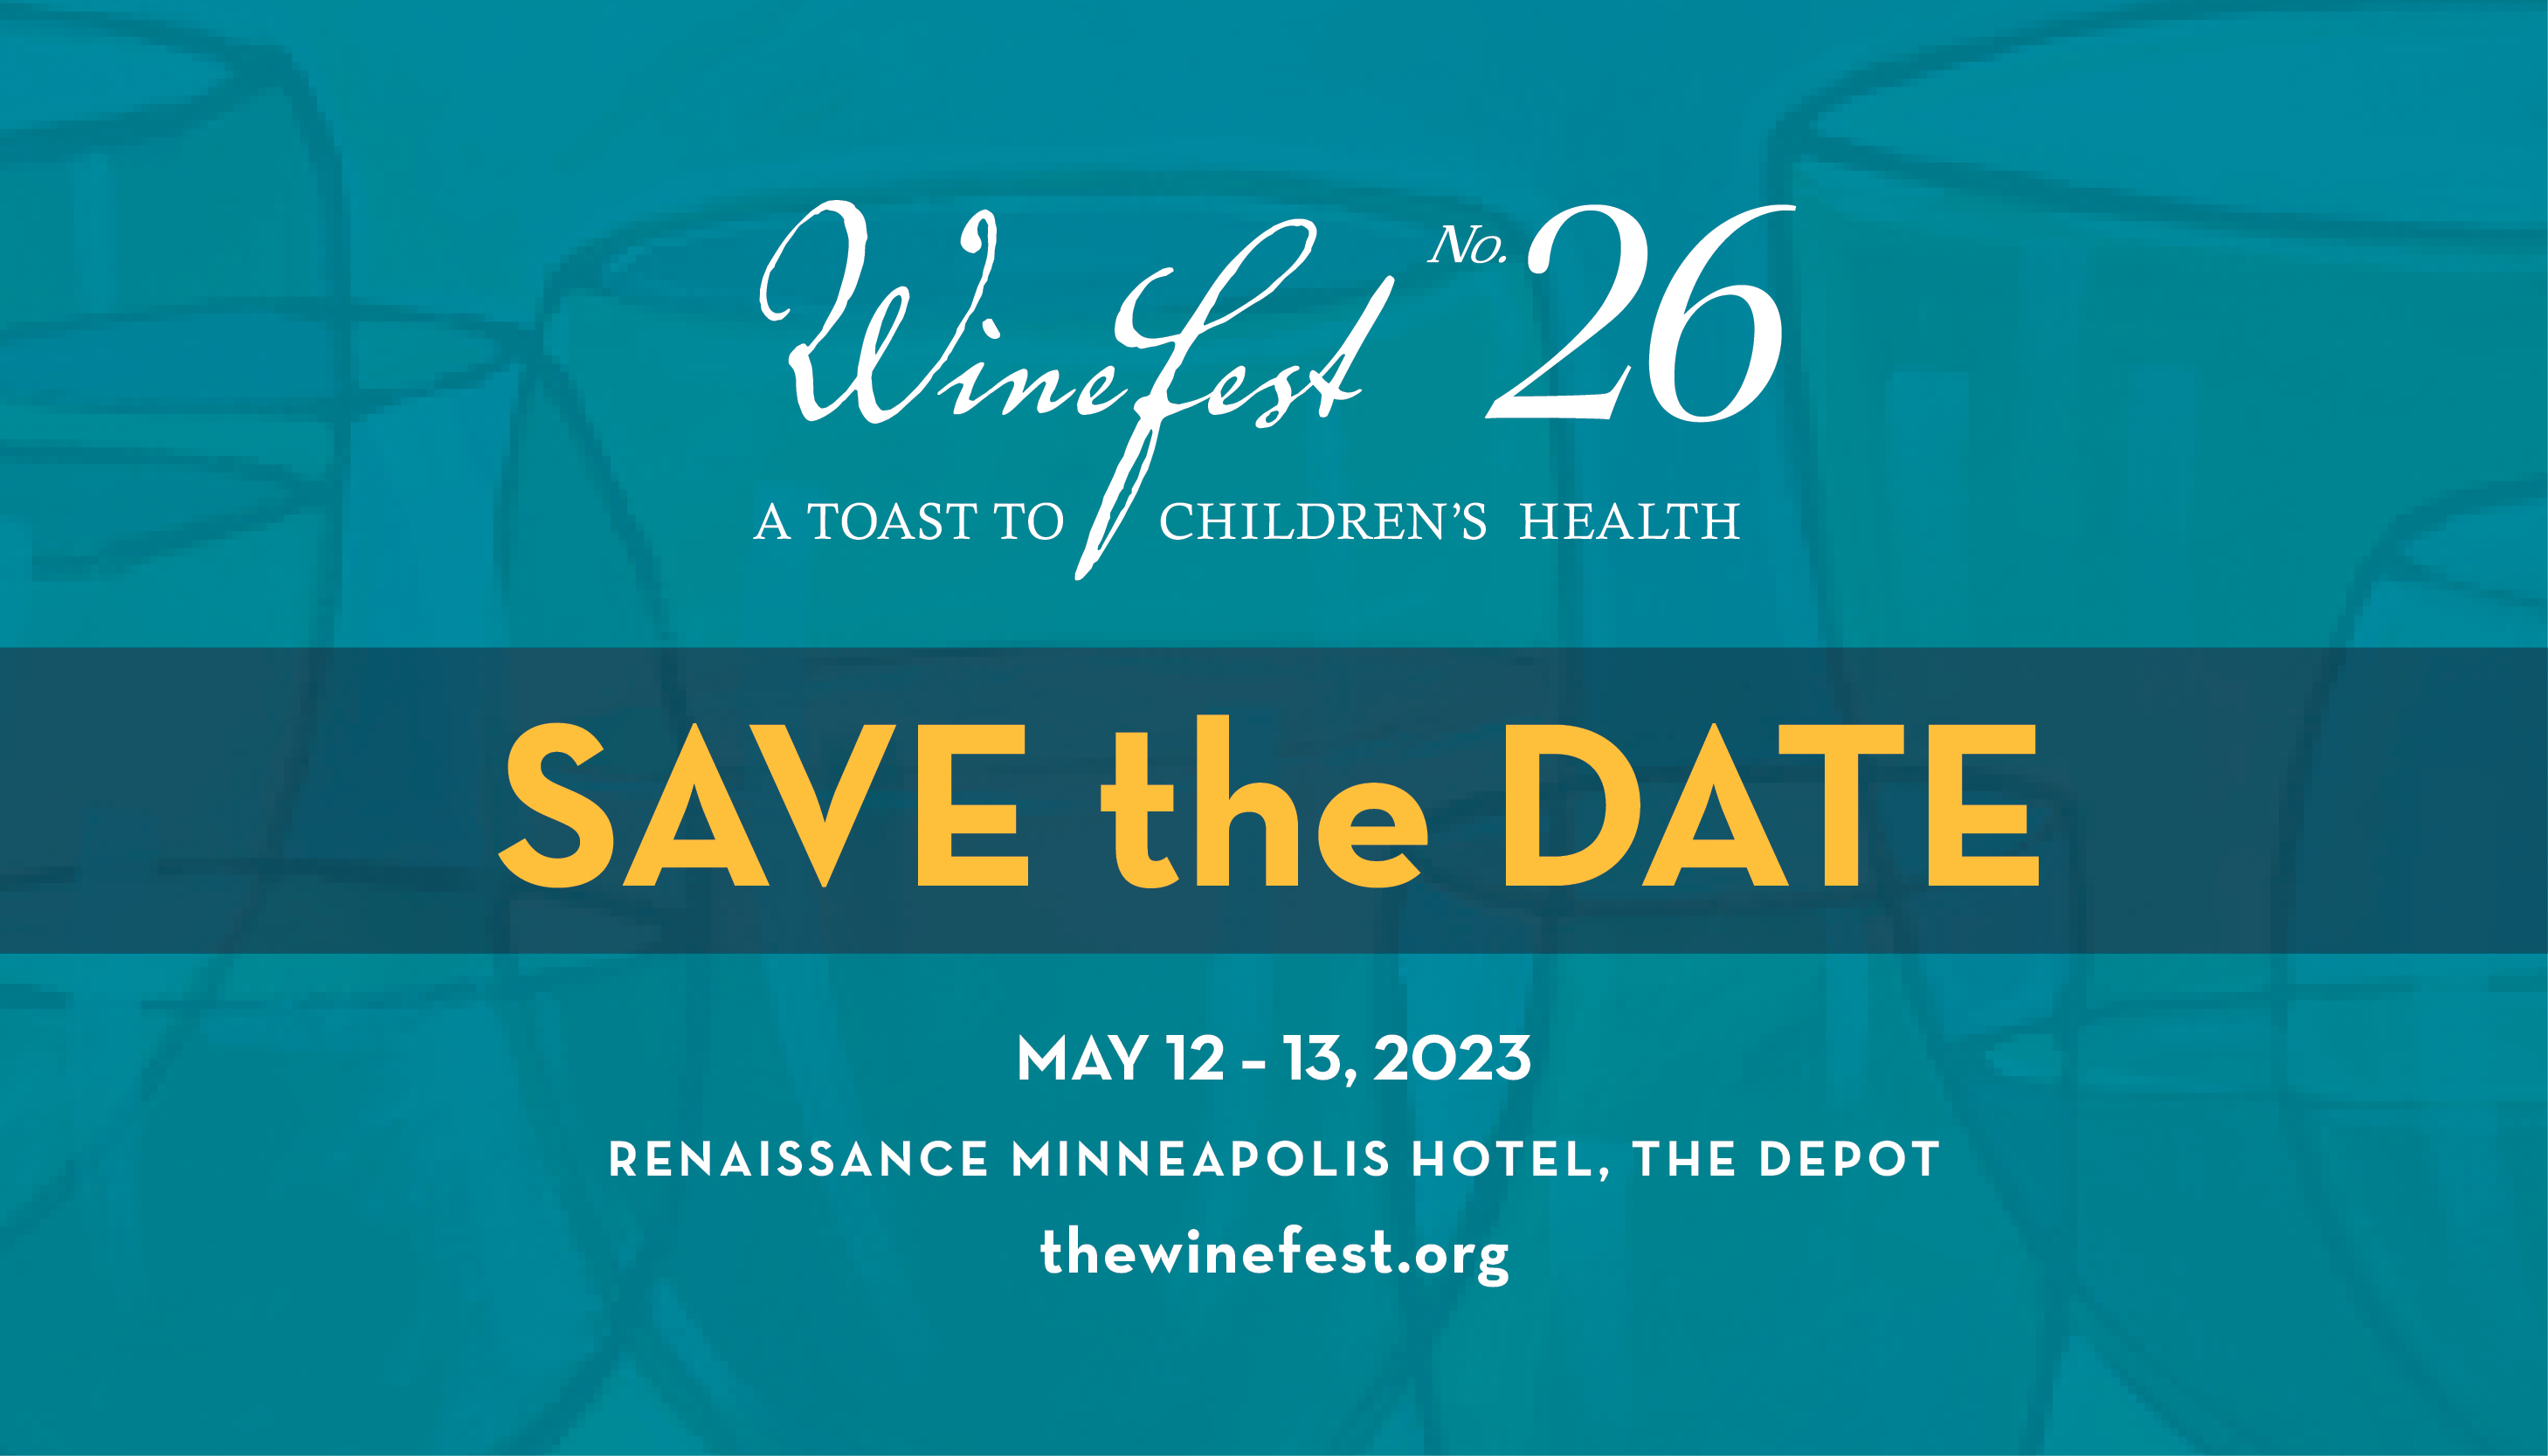 WineFest No. 26 Save the Date image